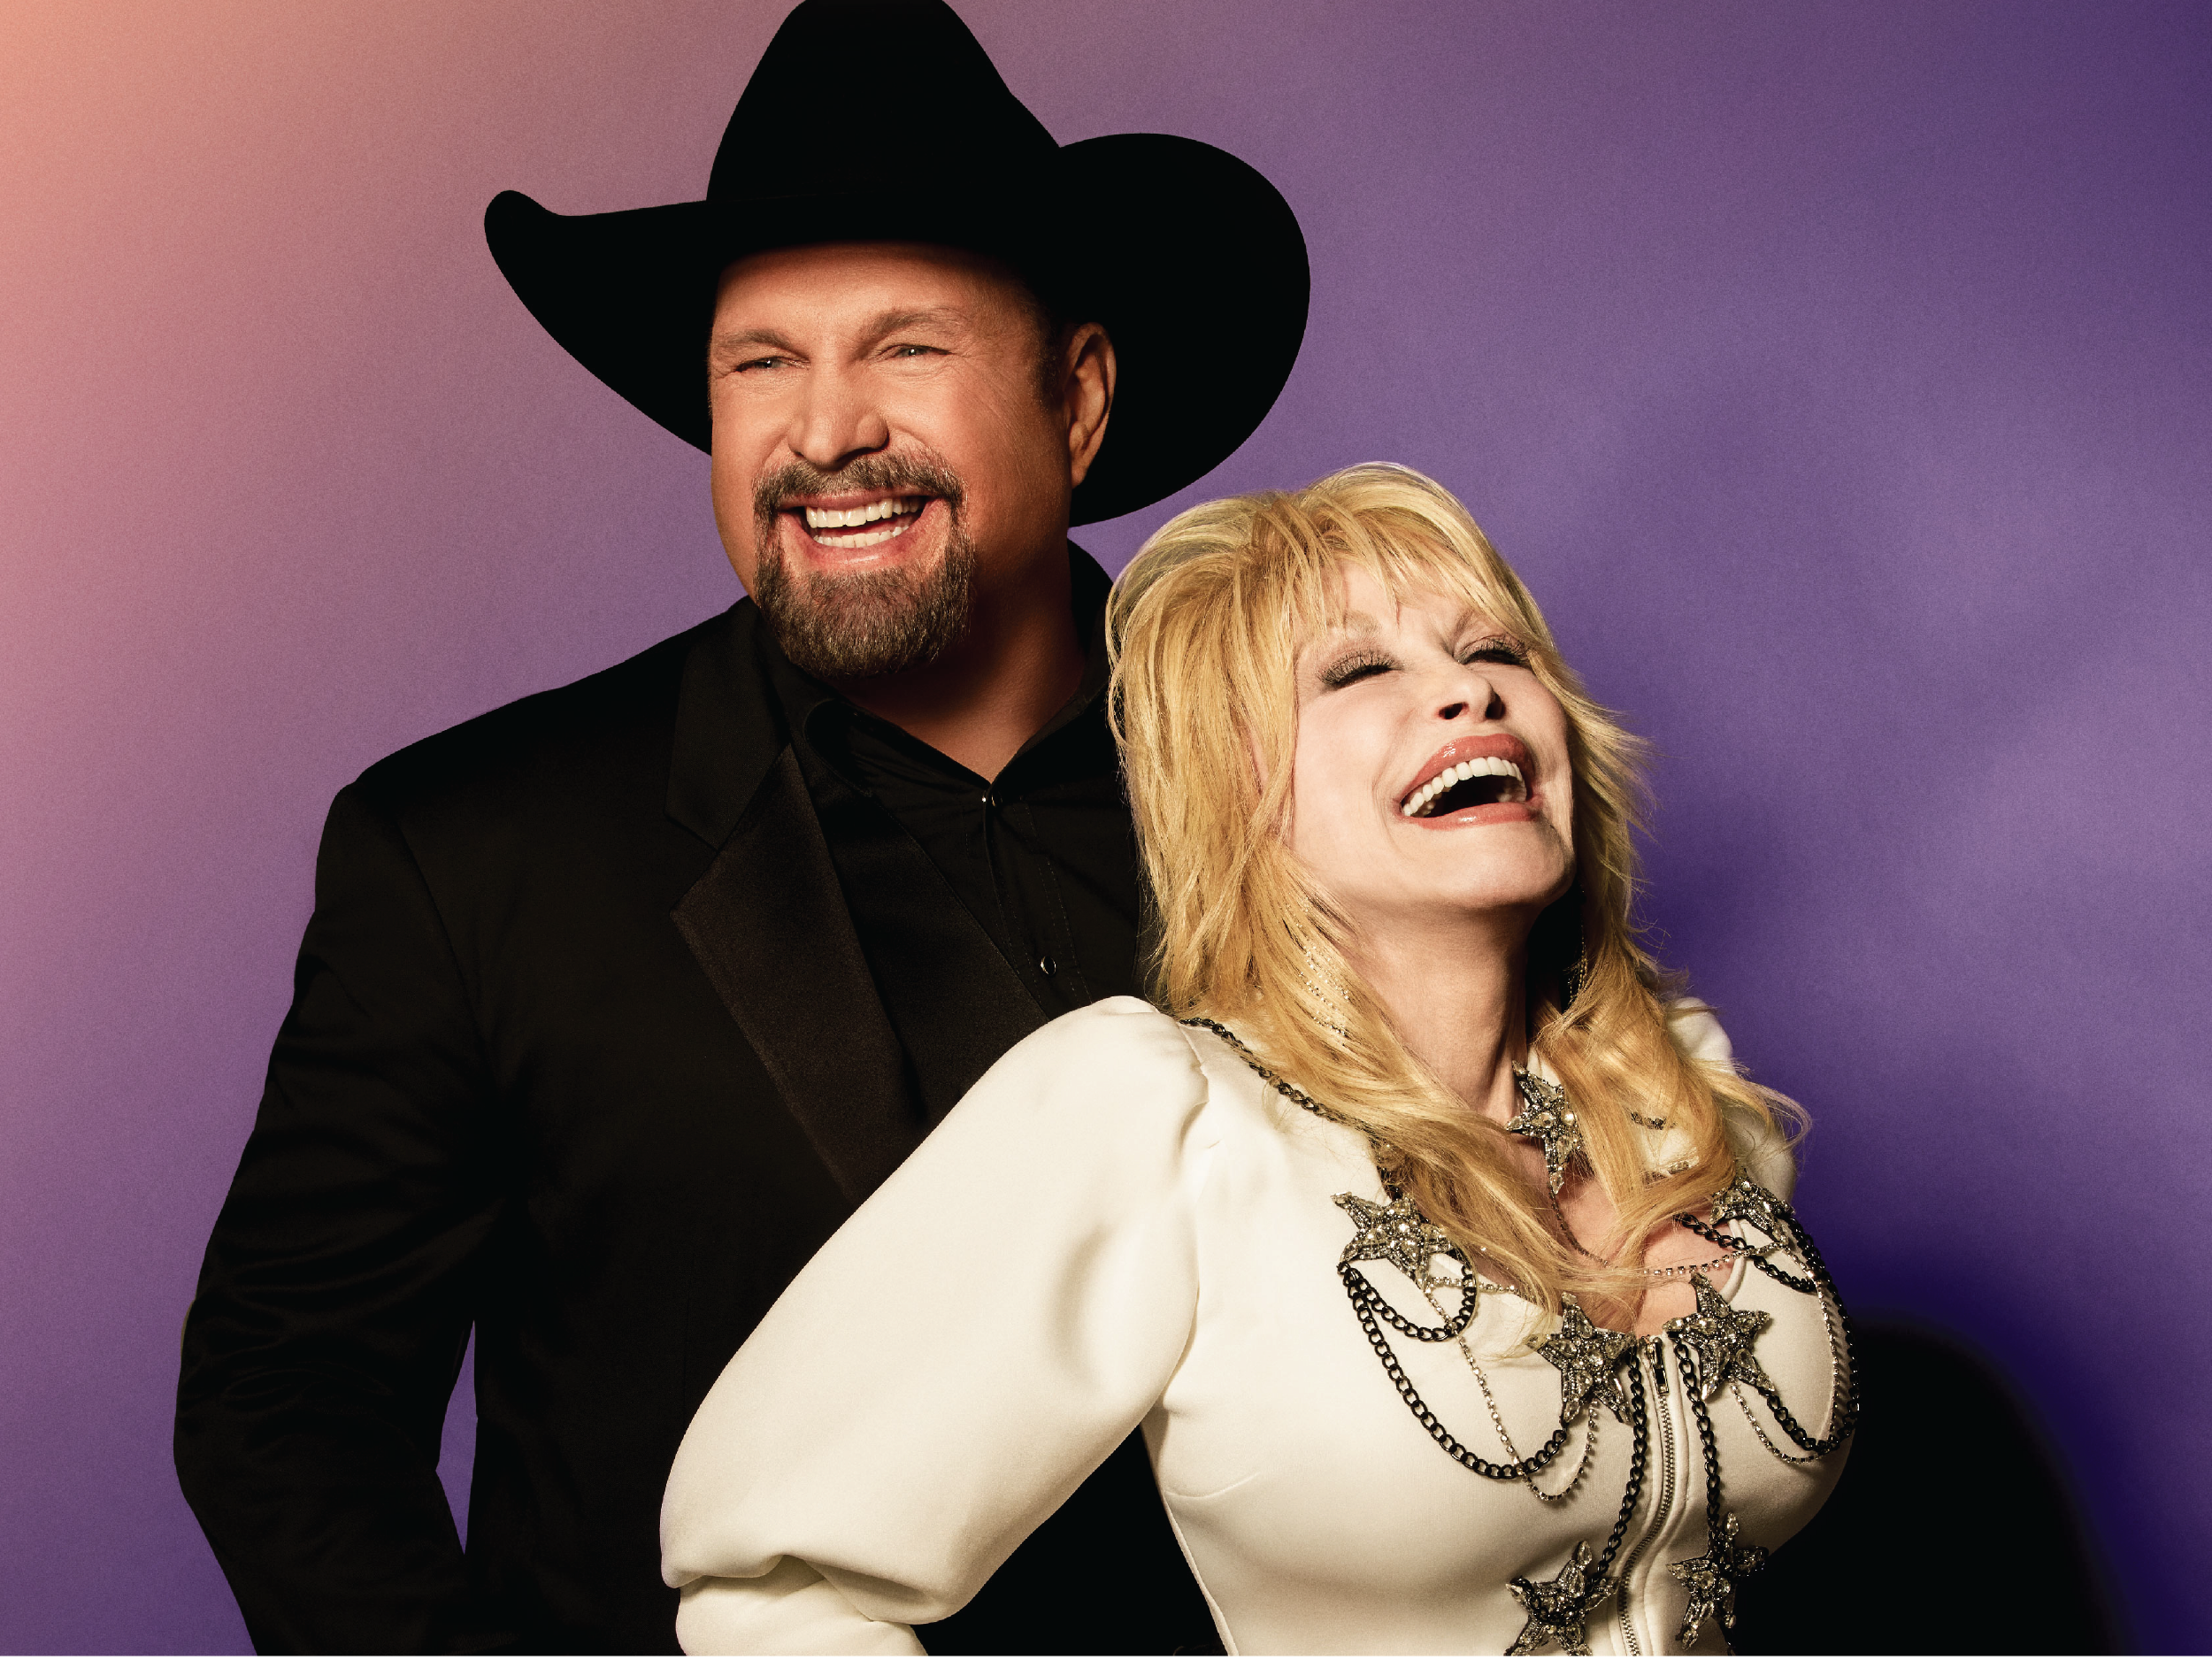 Dolly Parton and Garth Brooks to Host the ACMs